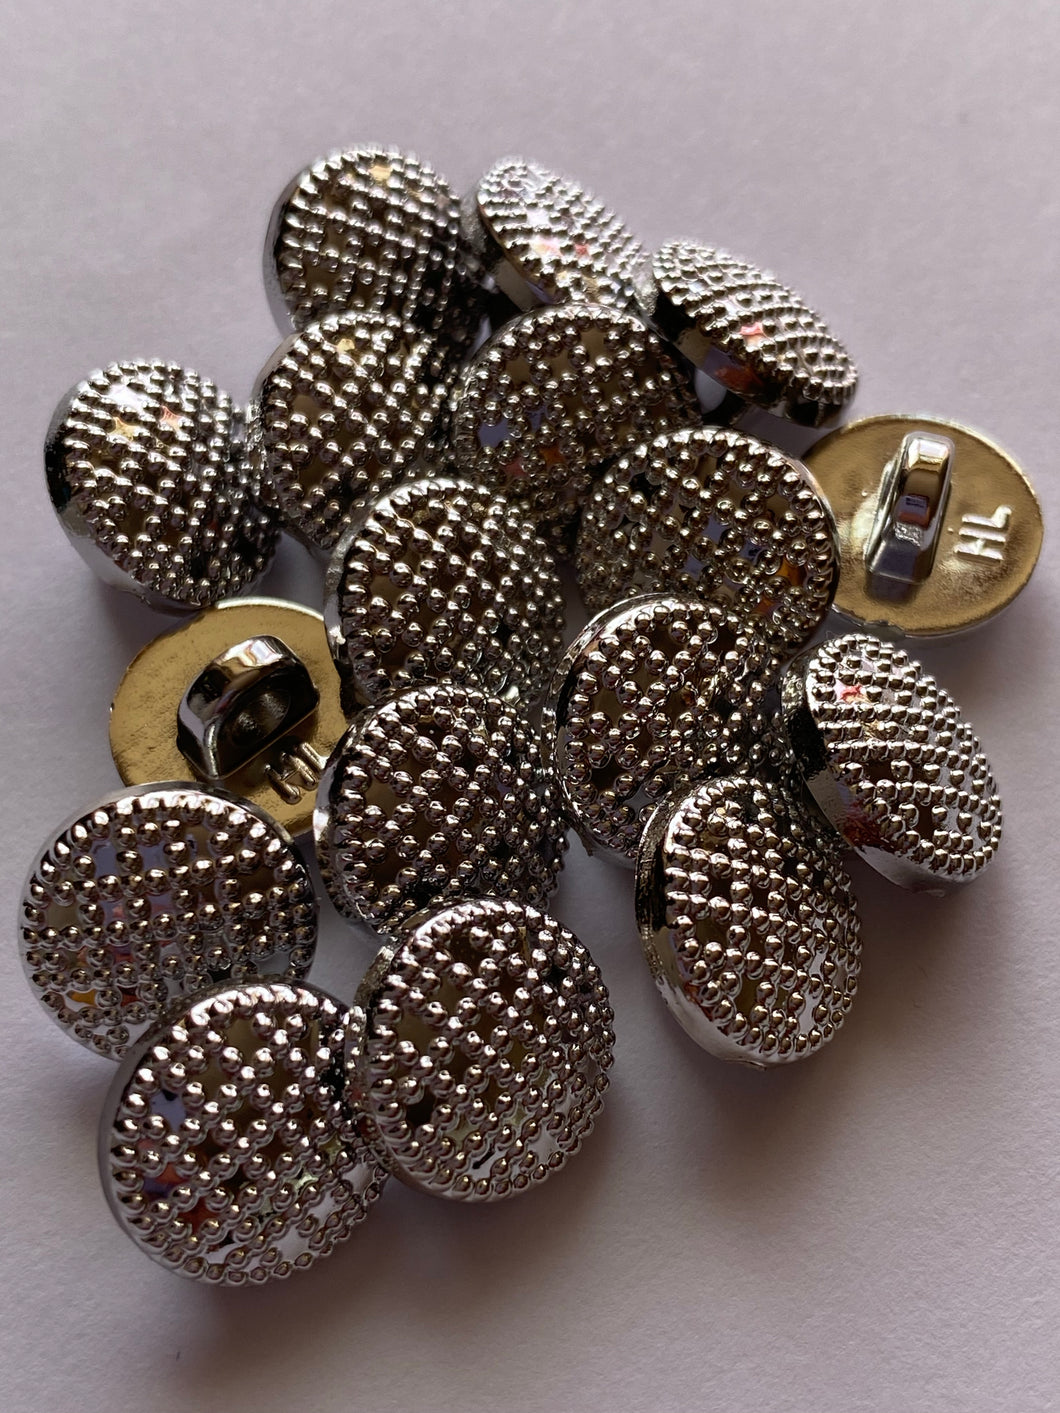 10 Silver Dots CHECK Shank Quality Buttons 13mm Wide Dresses Tops Coats Babies Blazers Shirt Sewing Craft